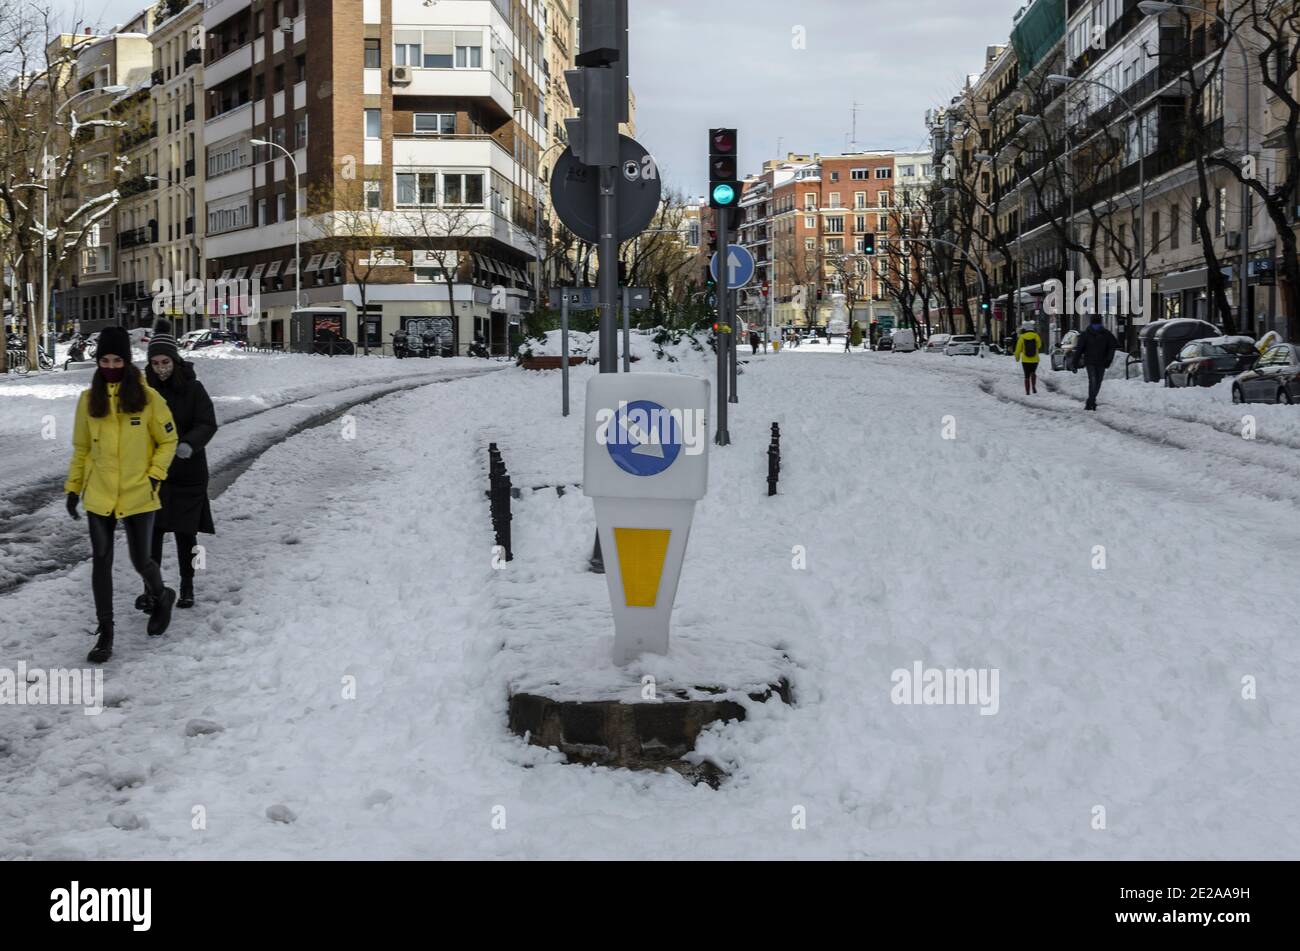 Madrid, Spain. 10 th January 2021. View of people in San Bernardo street after the storm snow. Credit: Enrique Davó. Stock Photo